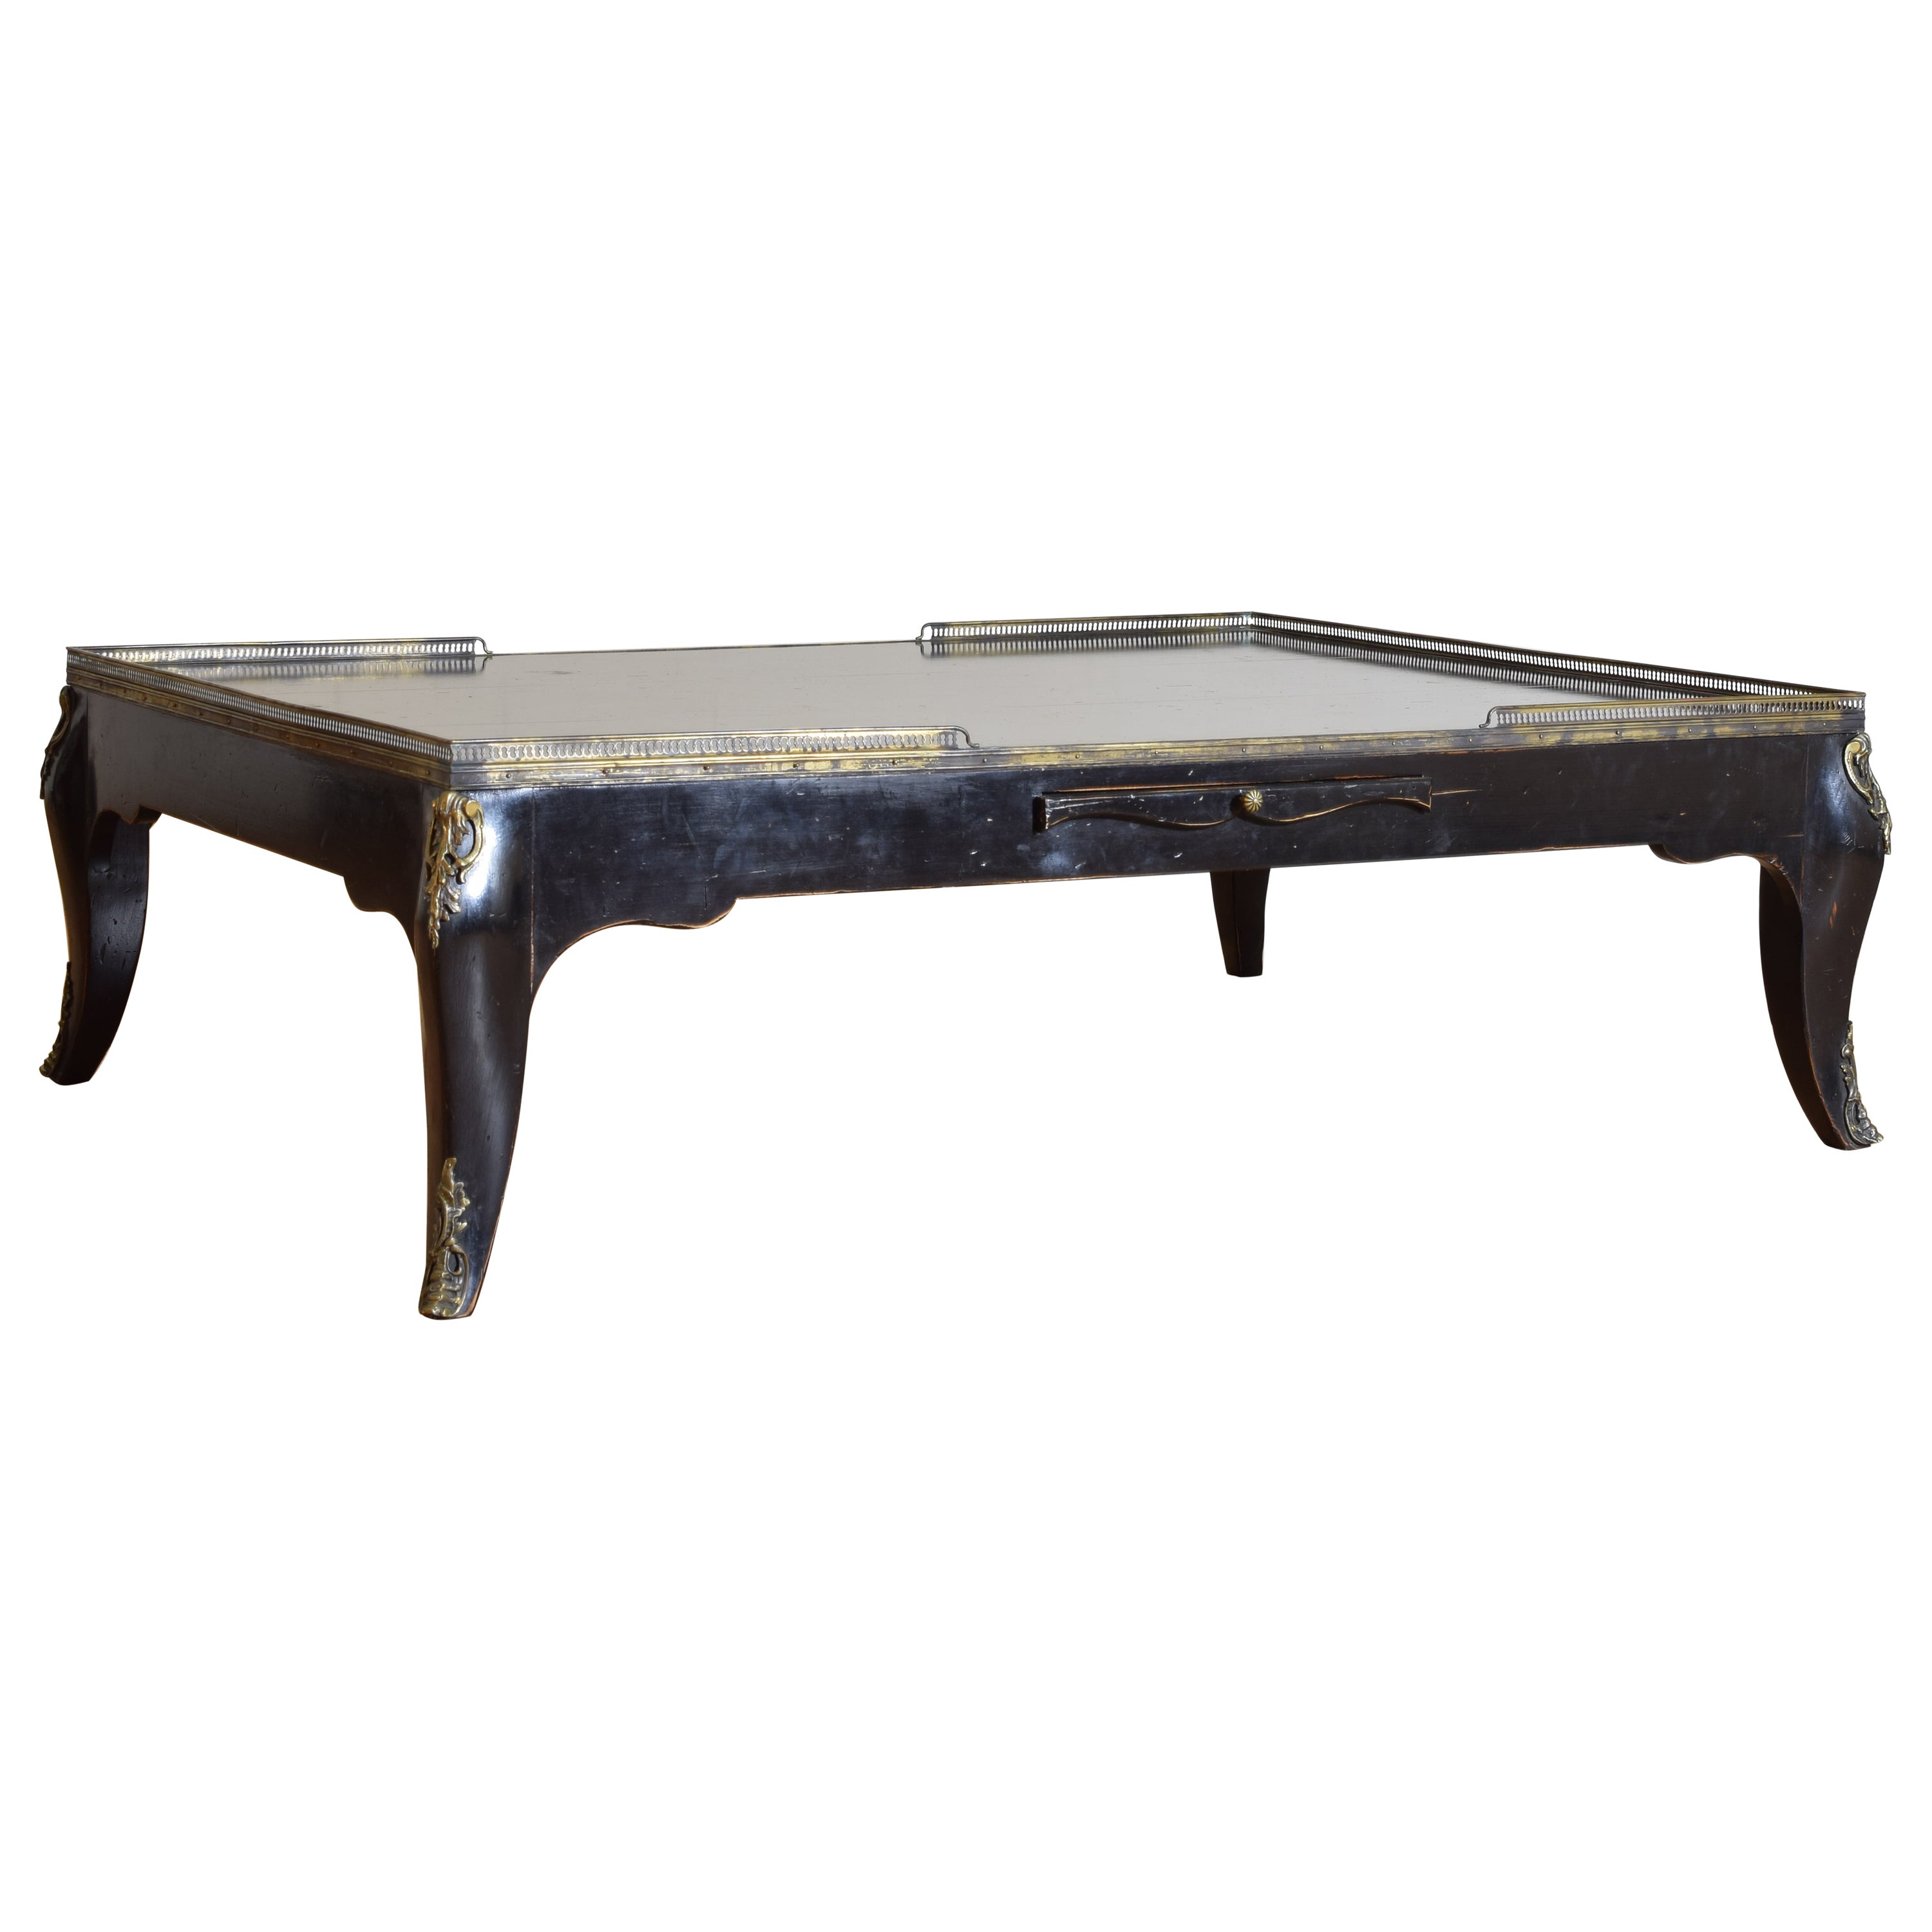 French Louis XV Style Ebonized & Brass Mounted Large Coffee Table, mid 20th cen.